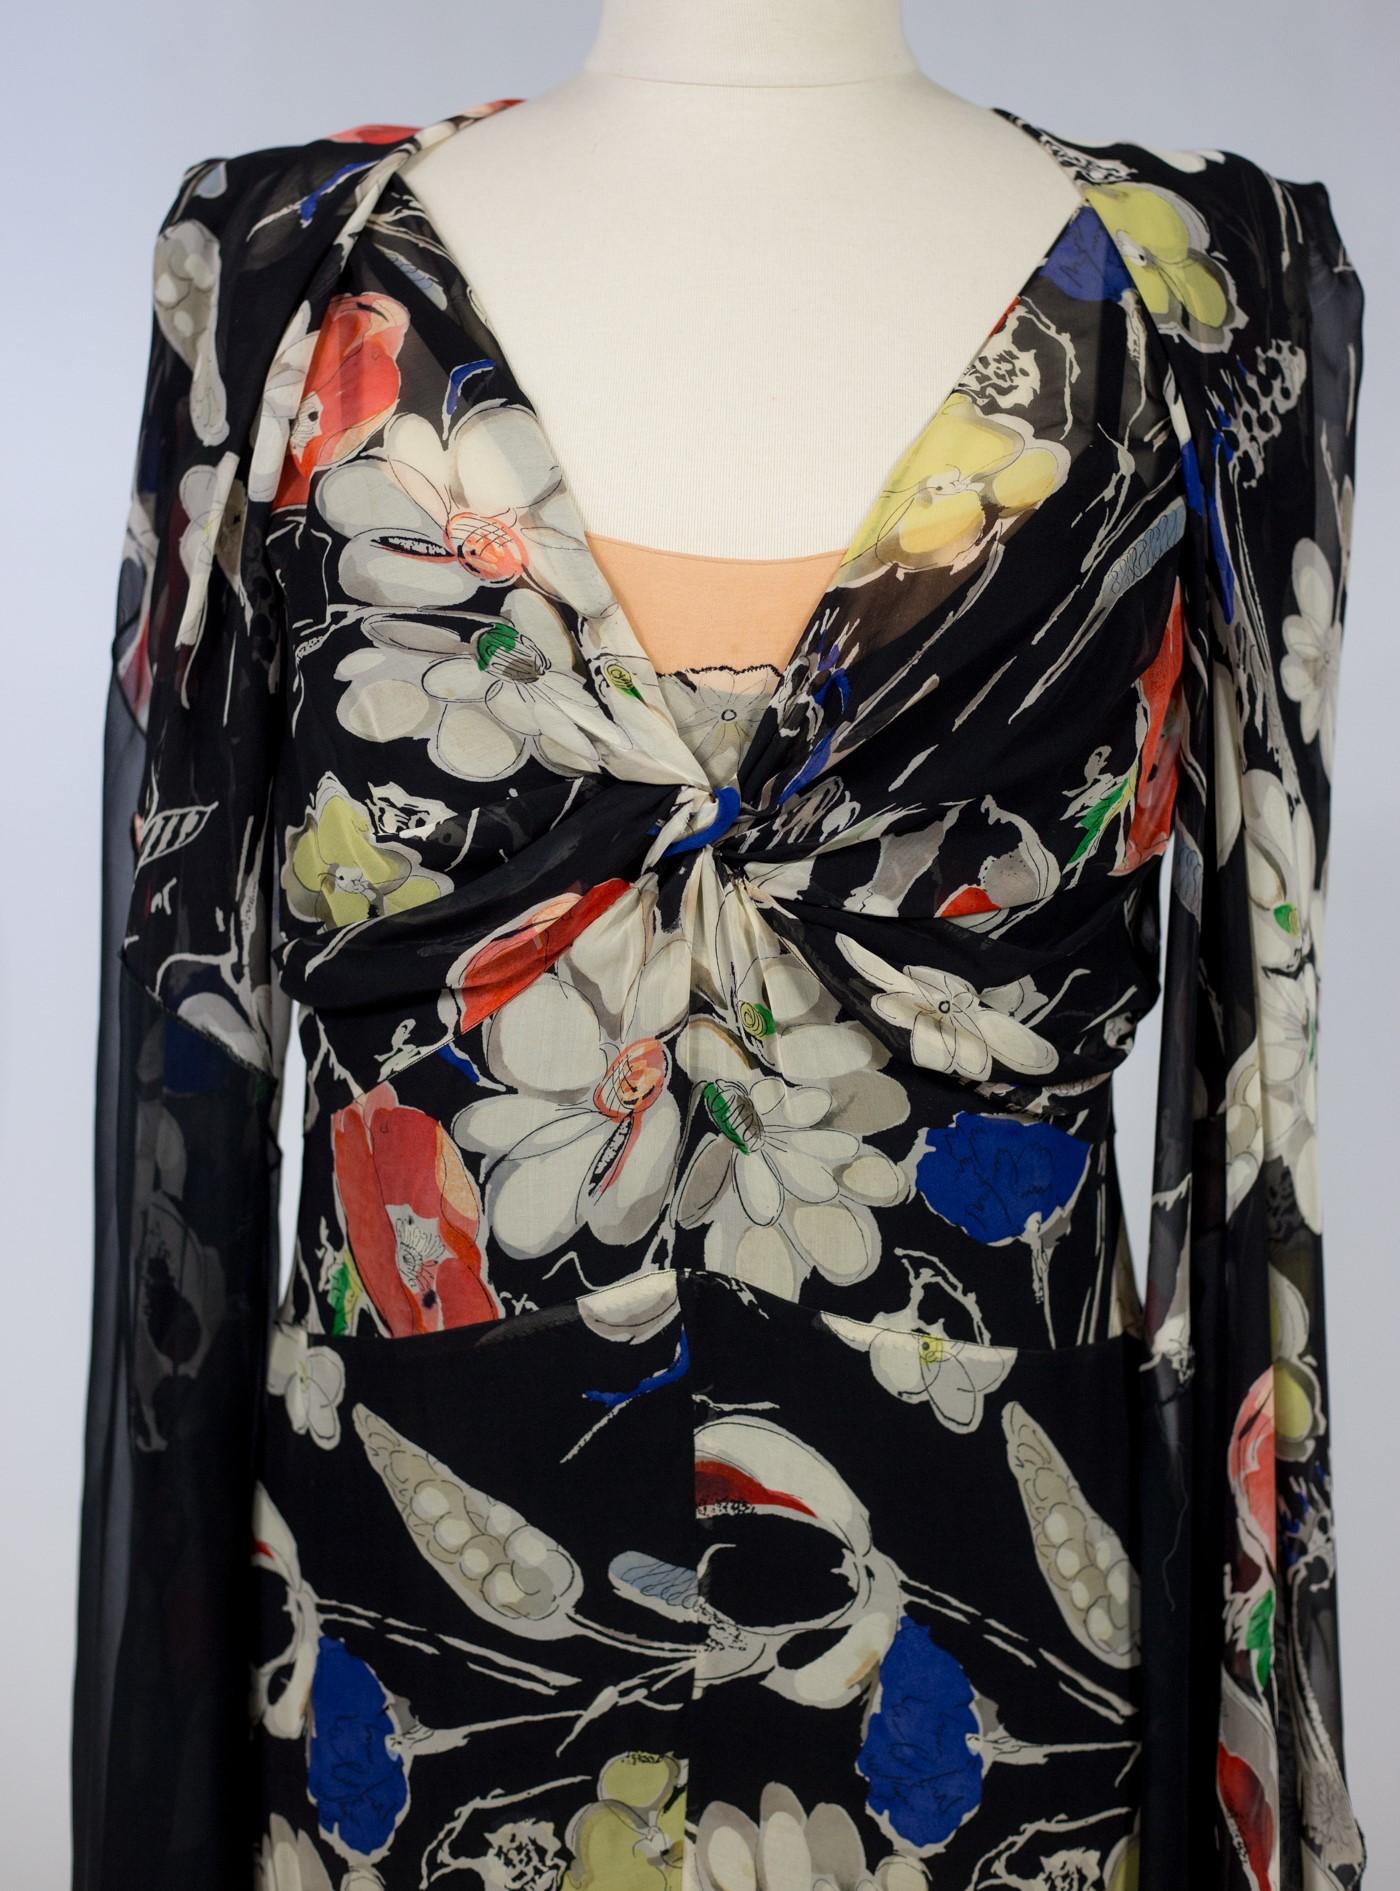 Circa 1935/1940

France

Beautiful printed silk chiffon dress, without label, but possibly Haute Couture dating from the late 1930s. The Maison Molyneux produced models in a print very close to this one. Long dress with buttoned back, sleeveless,